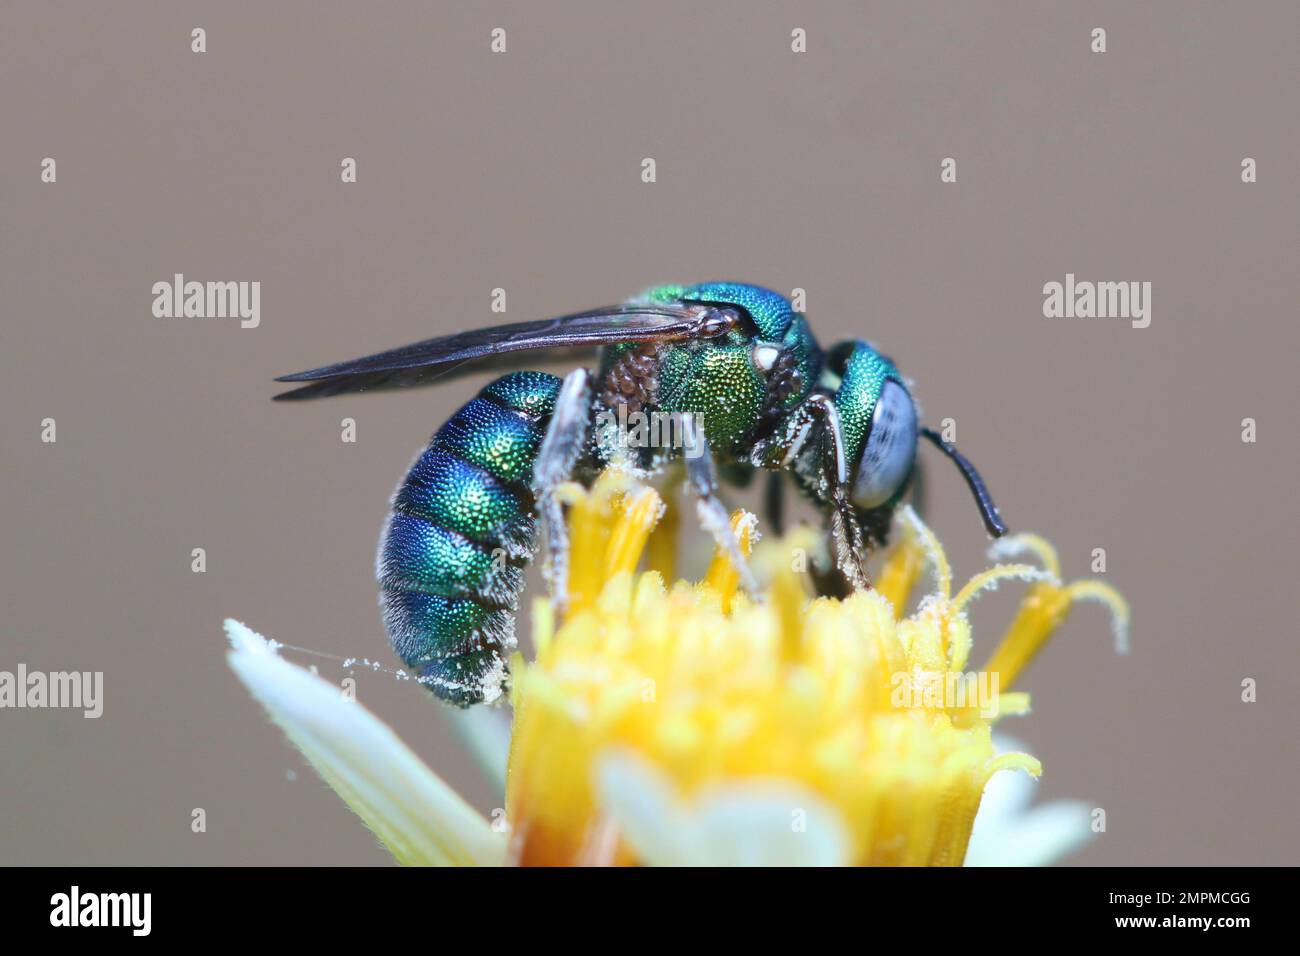 A closeup of a sweat bee on the flower Stock Photo